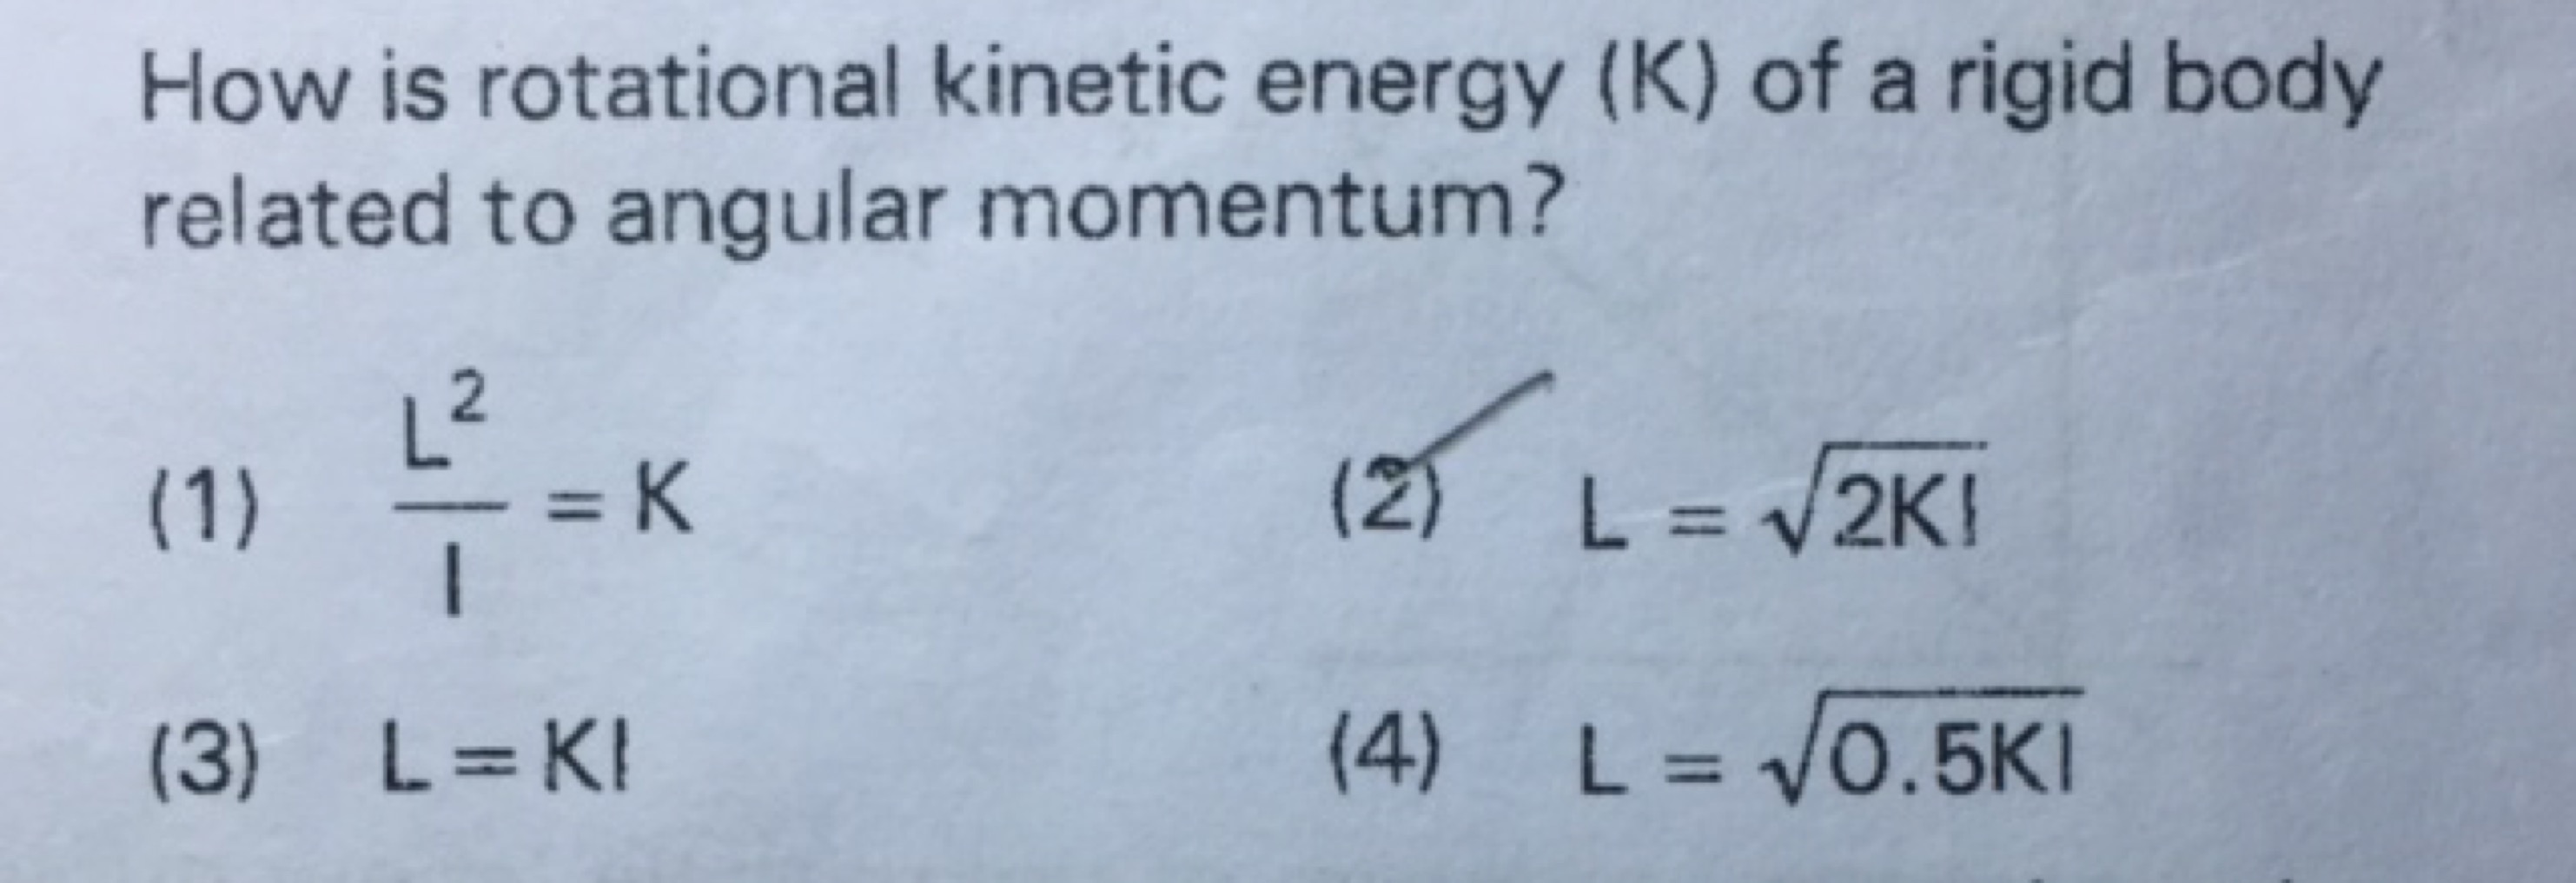 How is rotational kinetic energy (K) of a rigid body related to angula